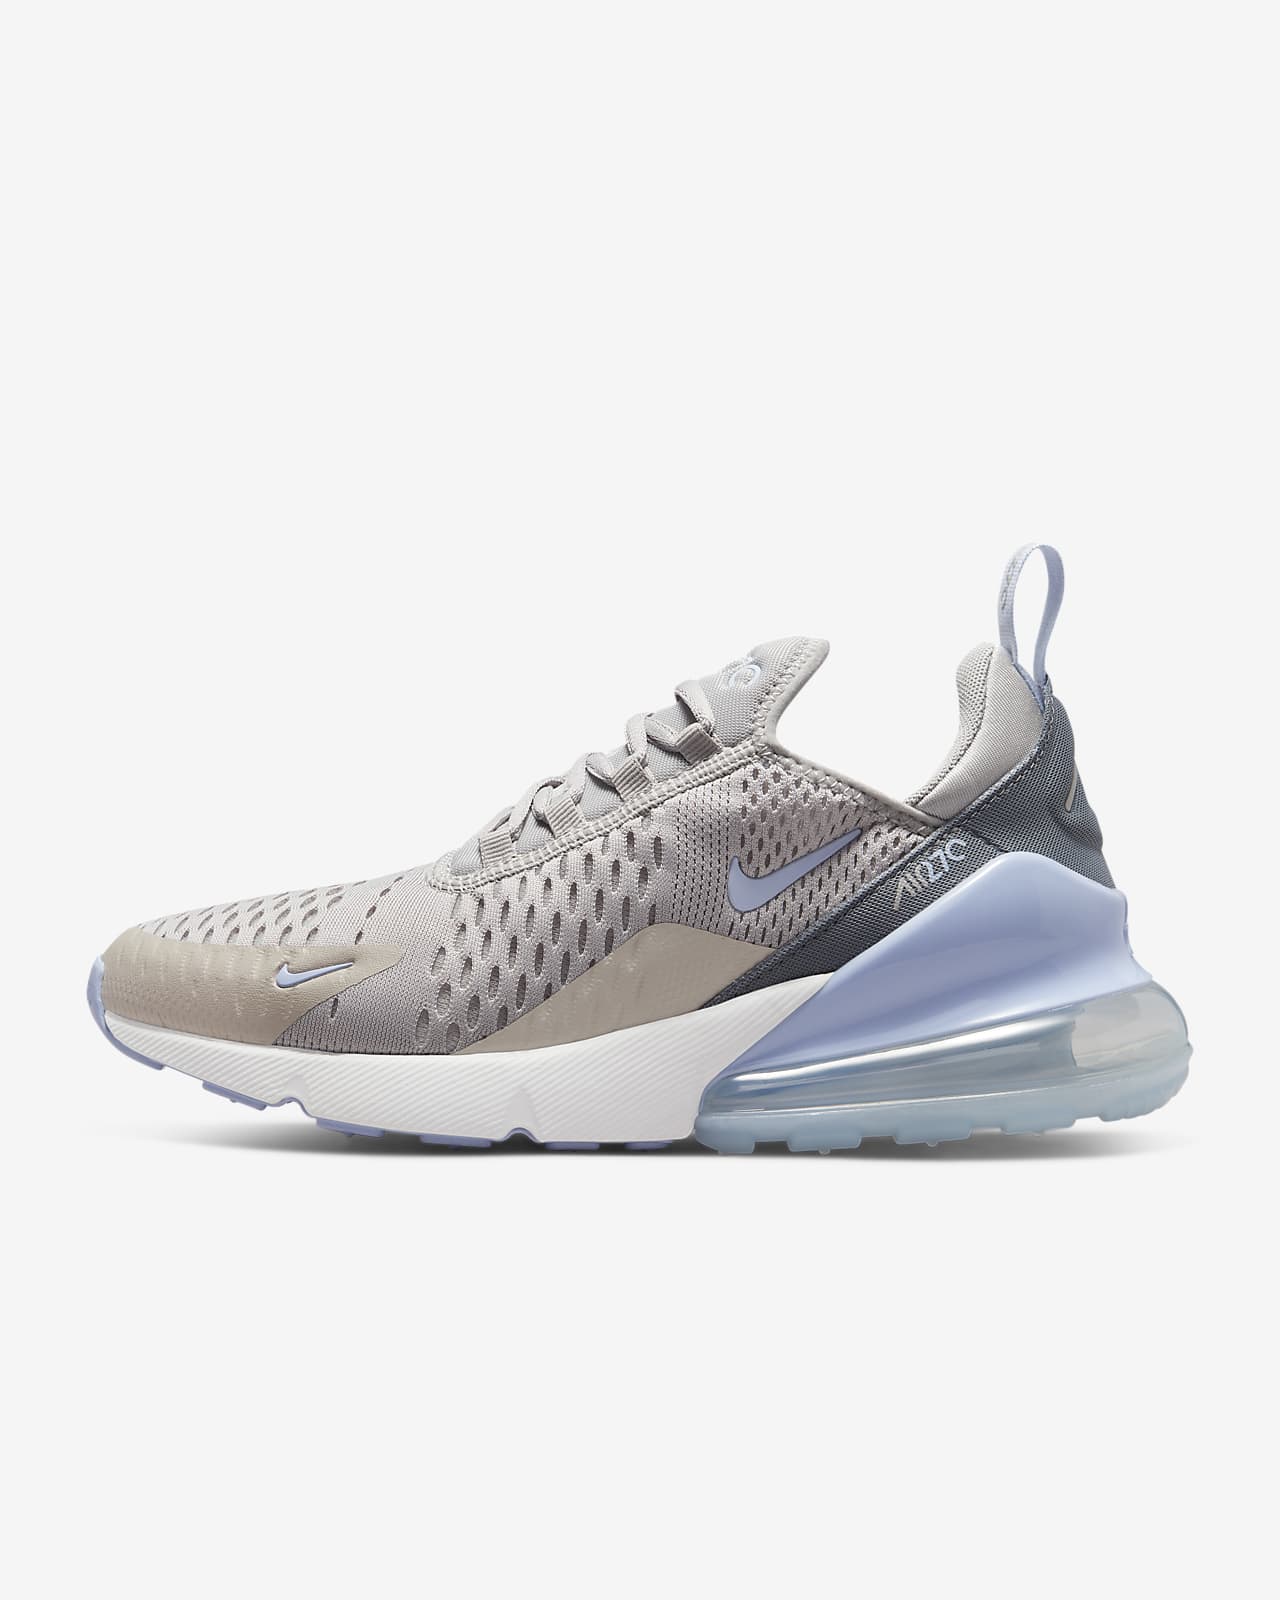 nike women's air max 270 shoes stores